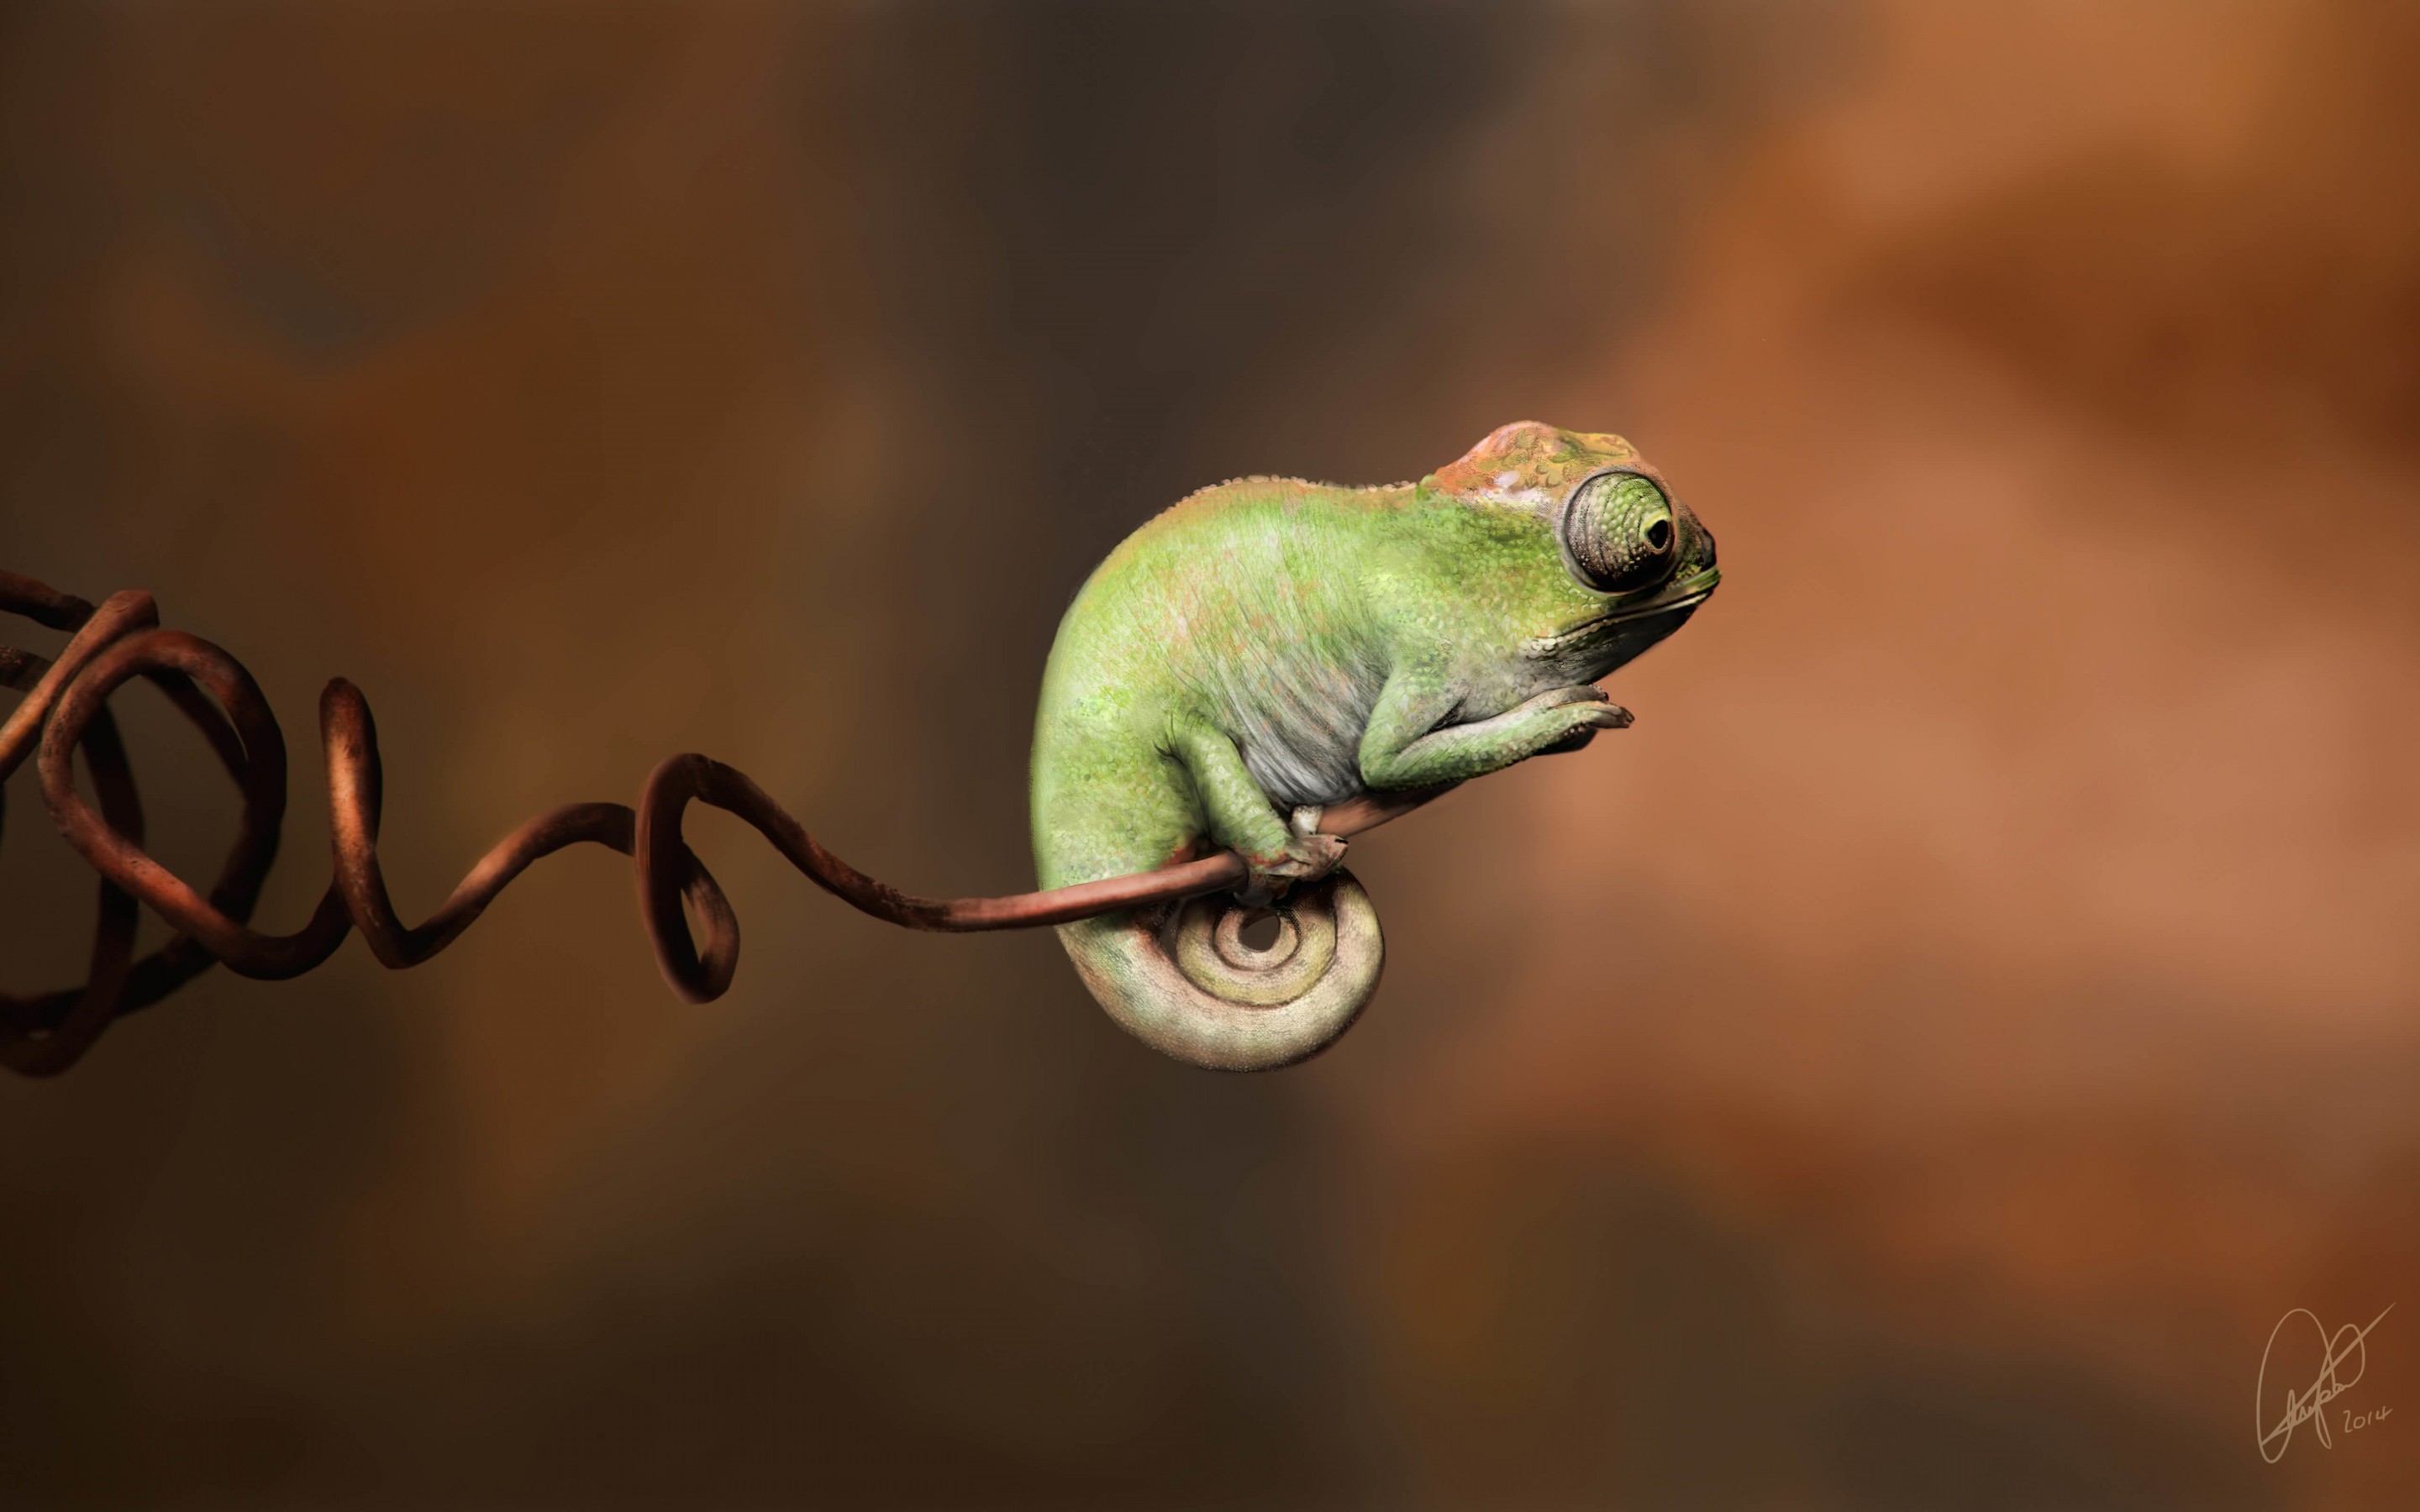 Baby Chameleon Perching On a Twisted Branch Wallpaper for Desktop 2880x1800